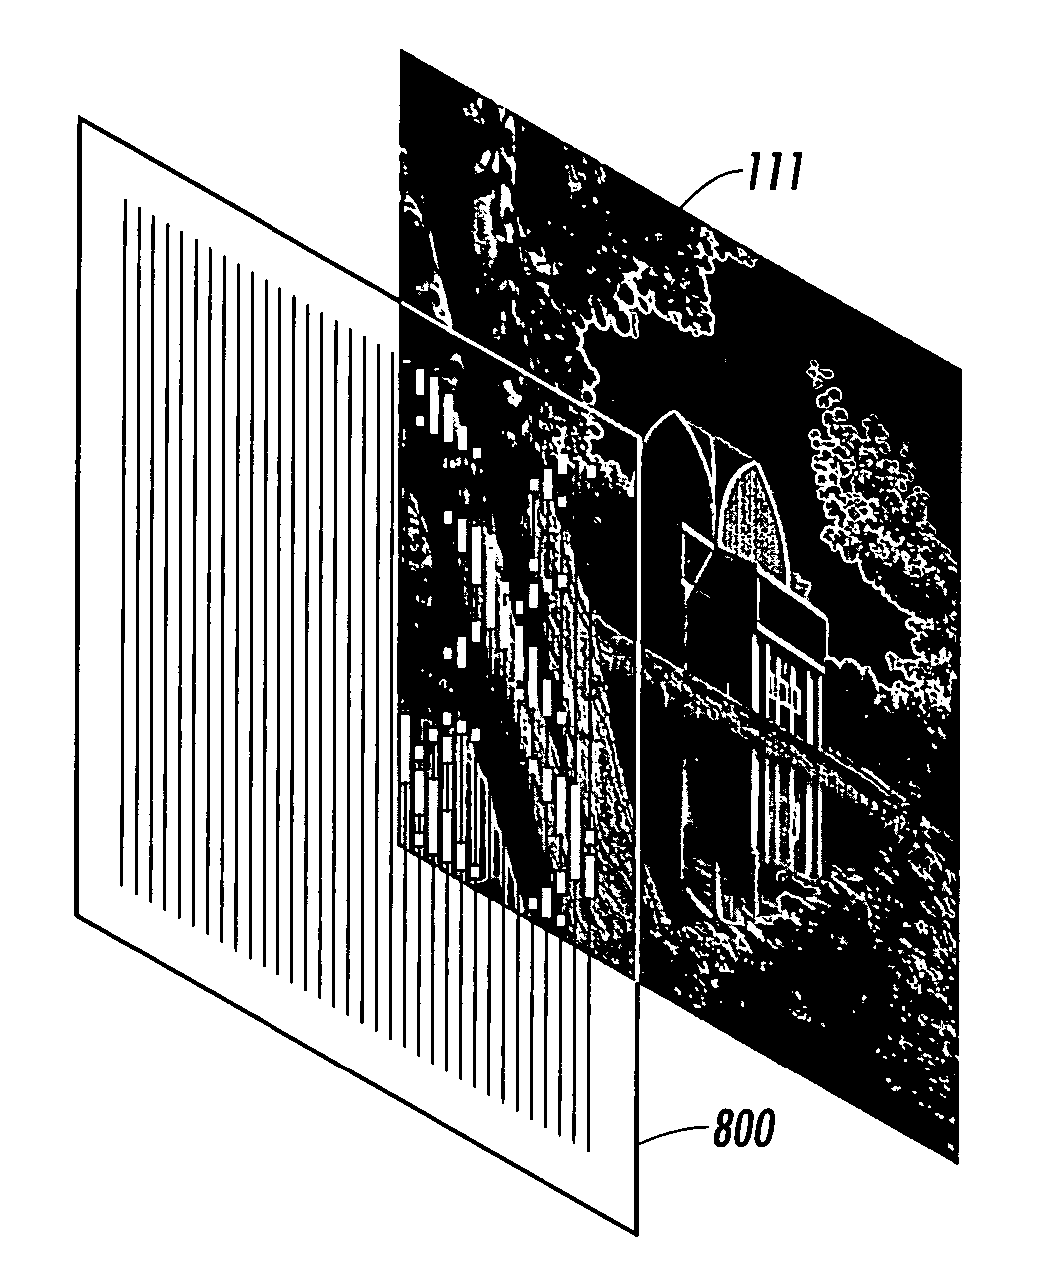 Moiré-based auto-stereoscopic watermarks